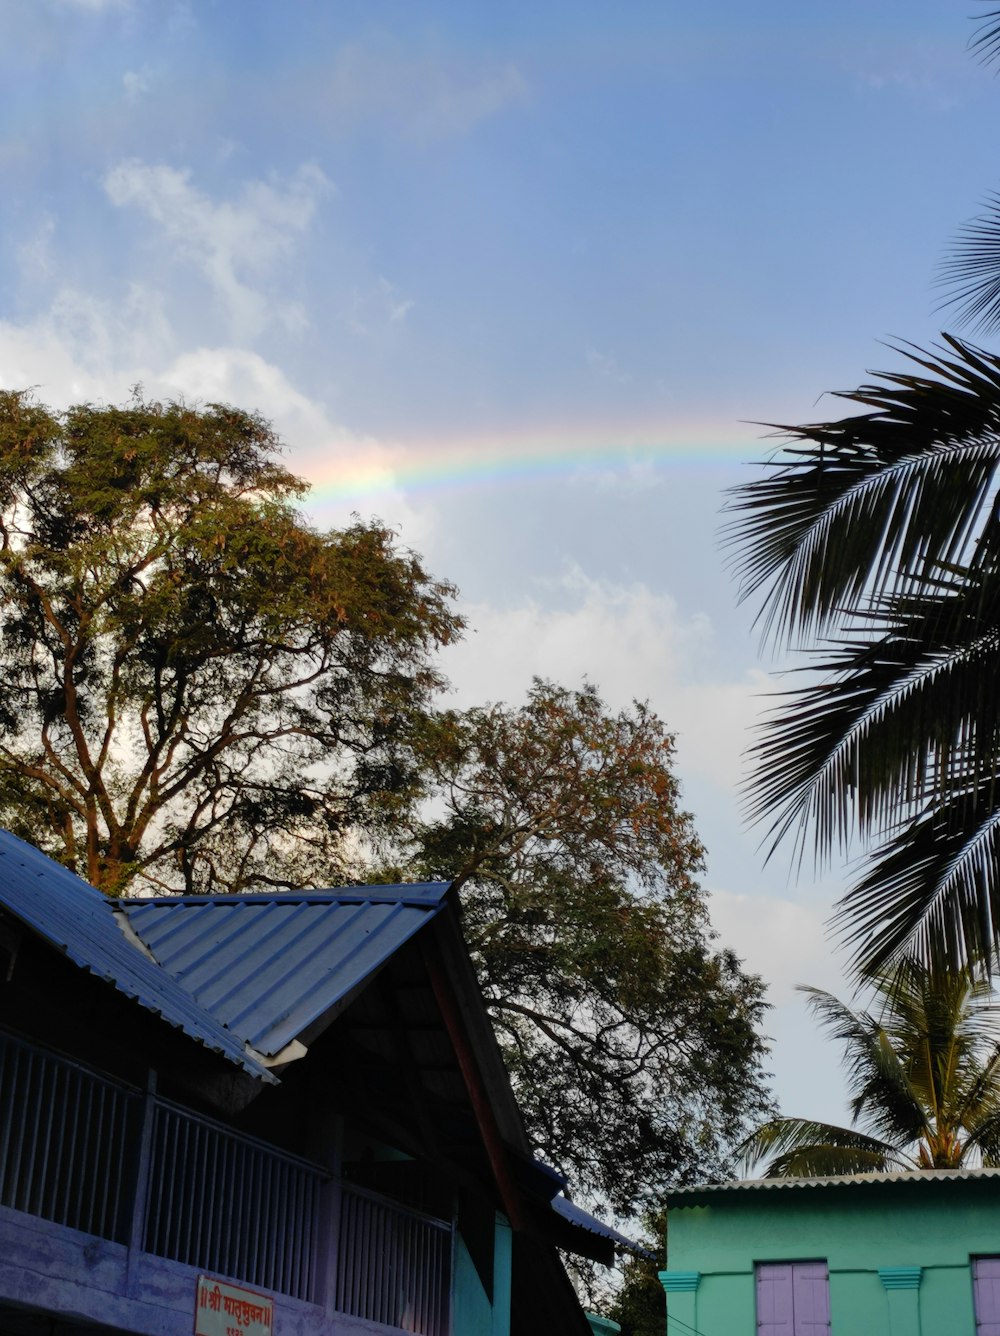 a rainbow shines in the sky over a house